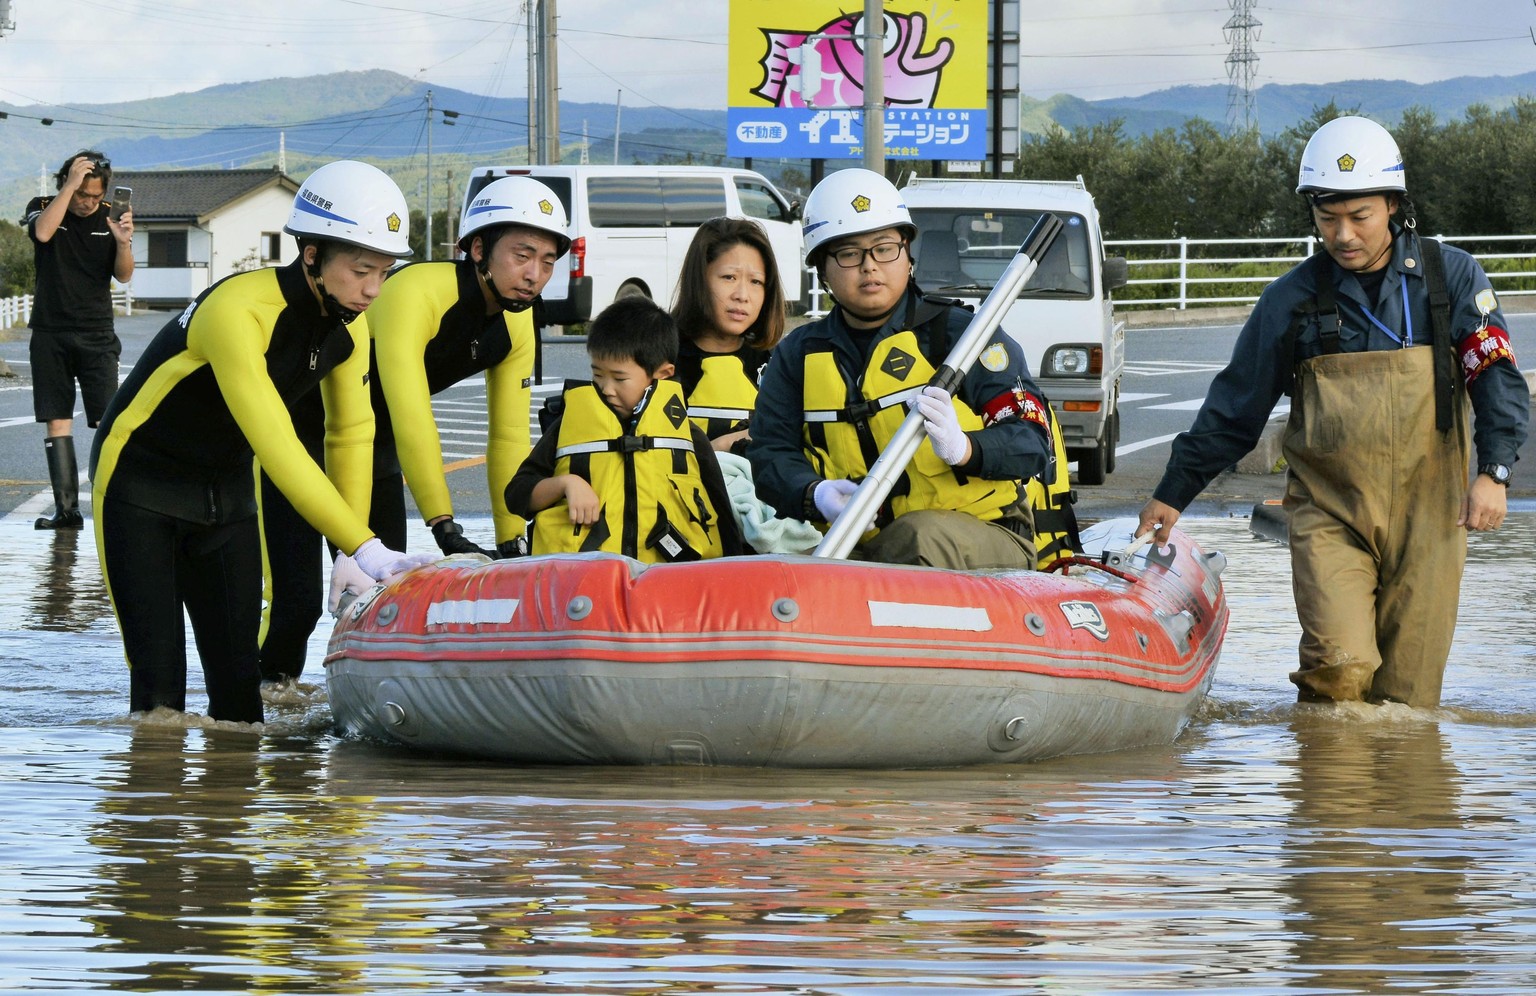 Residents on a rubber boat are rescued as they were stranded by Typhoon Hagibis, in Iwaki, Fukushima prefecture, northern Japan, Sunday, Oct. 13, 2019. Rescue efforts for people stranded in flooded ar ...